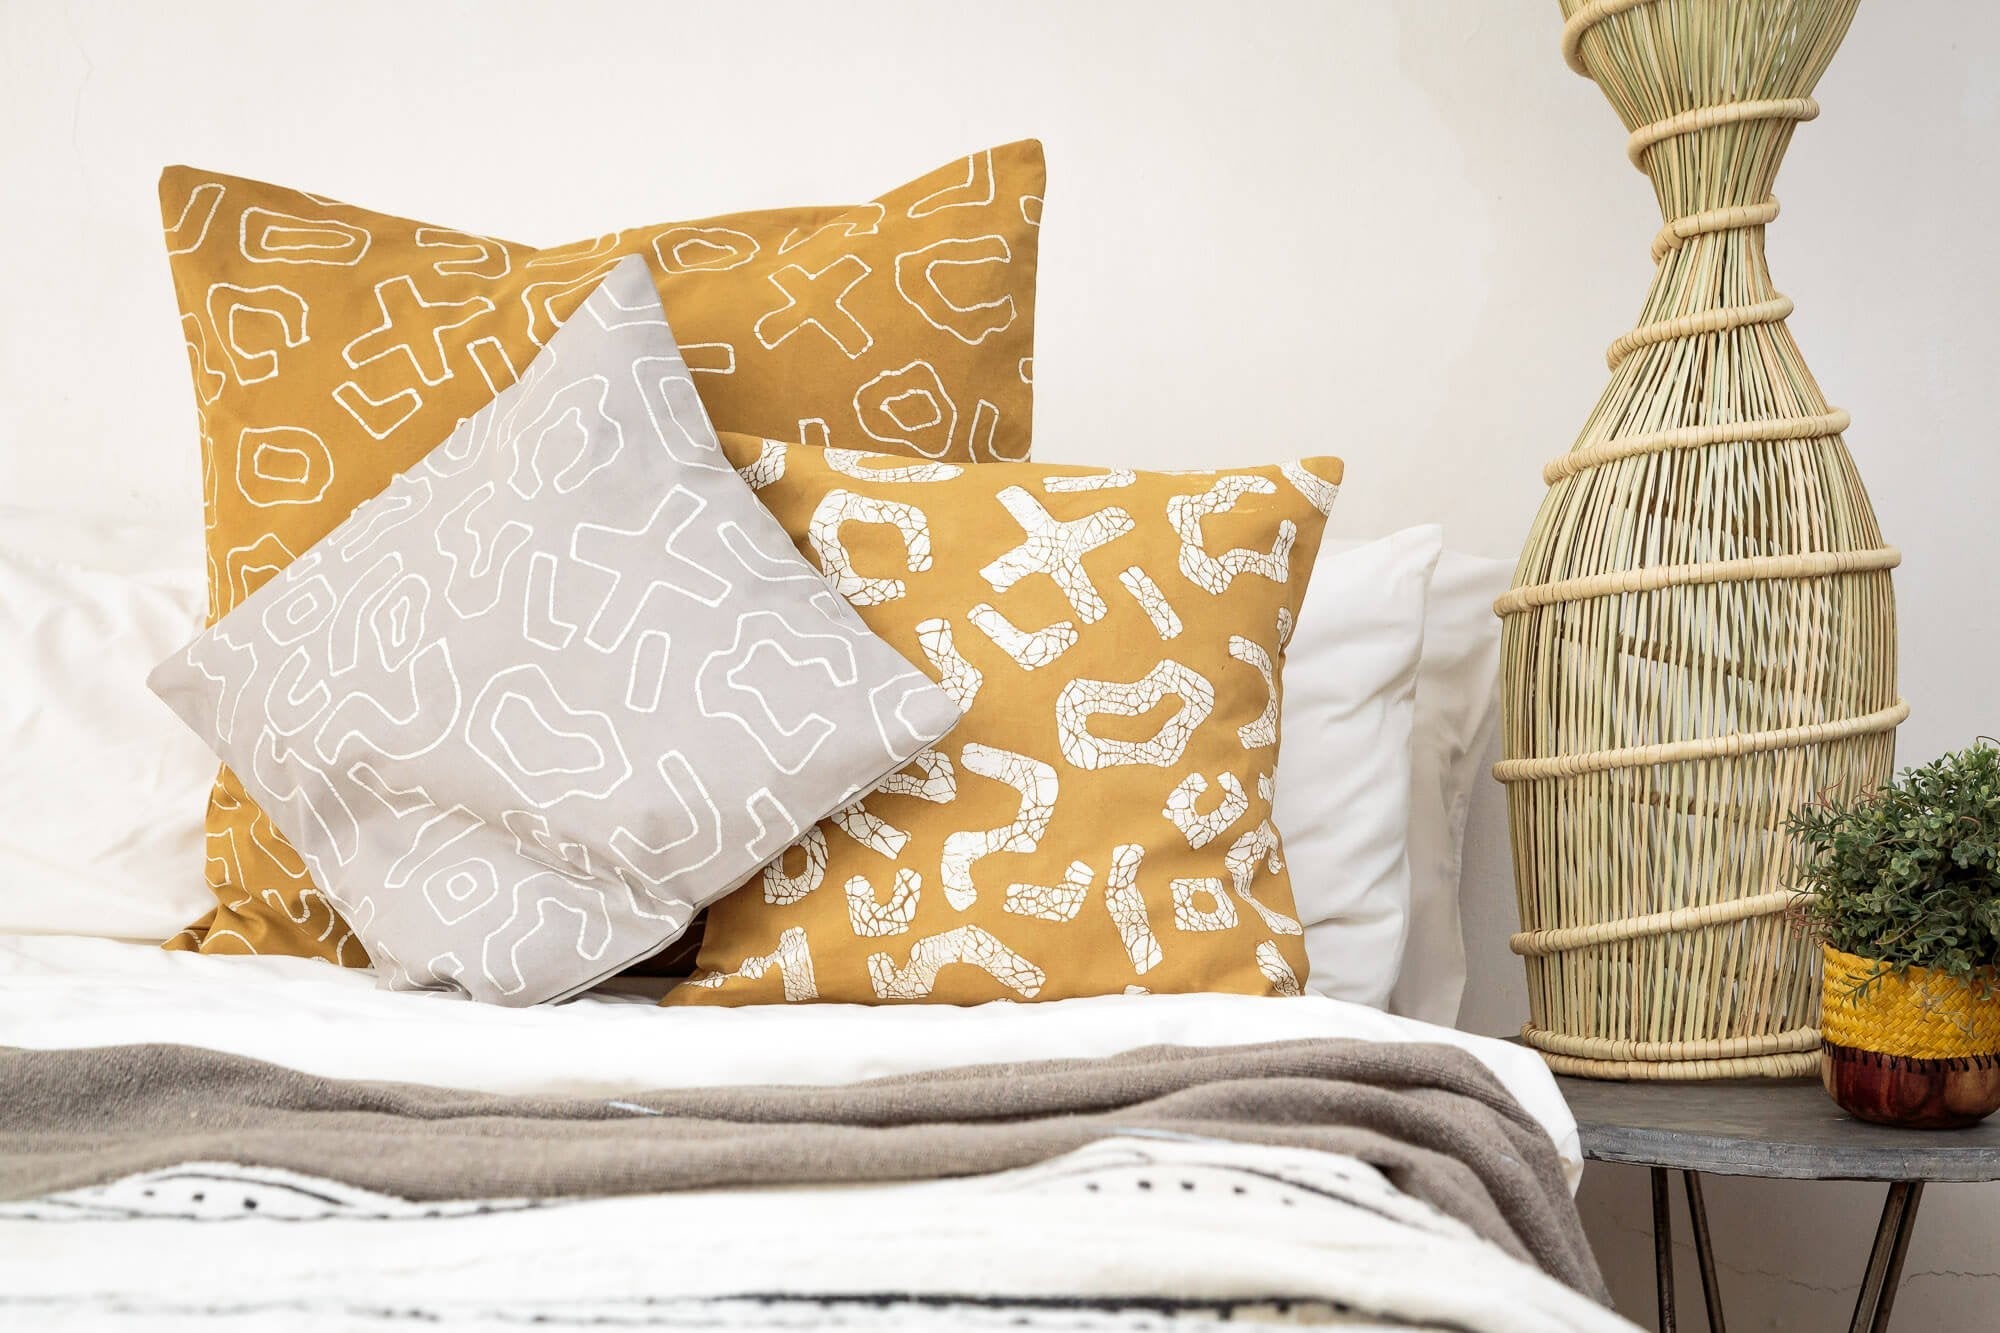 Eco-friendly pillow cover in bright yellow with a bold graphic batik pattern, perfect for lively/sustainable living spaces.